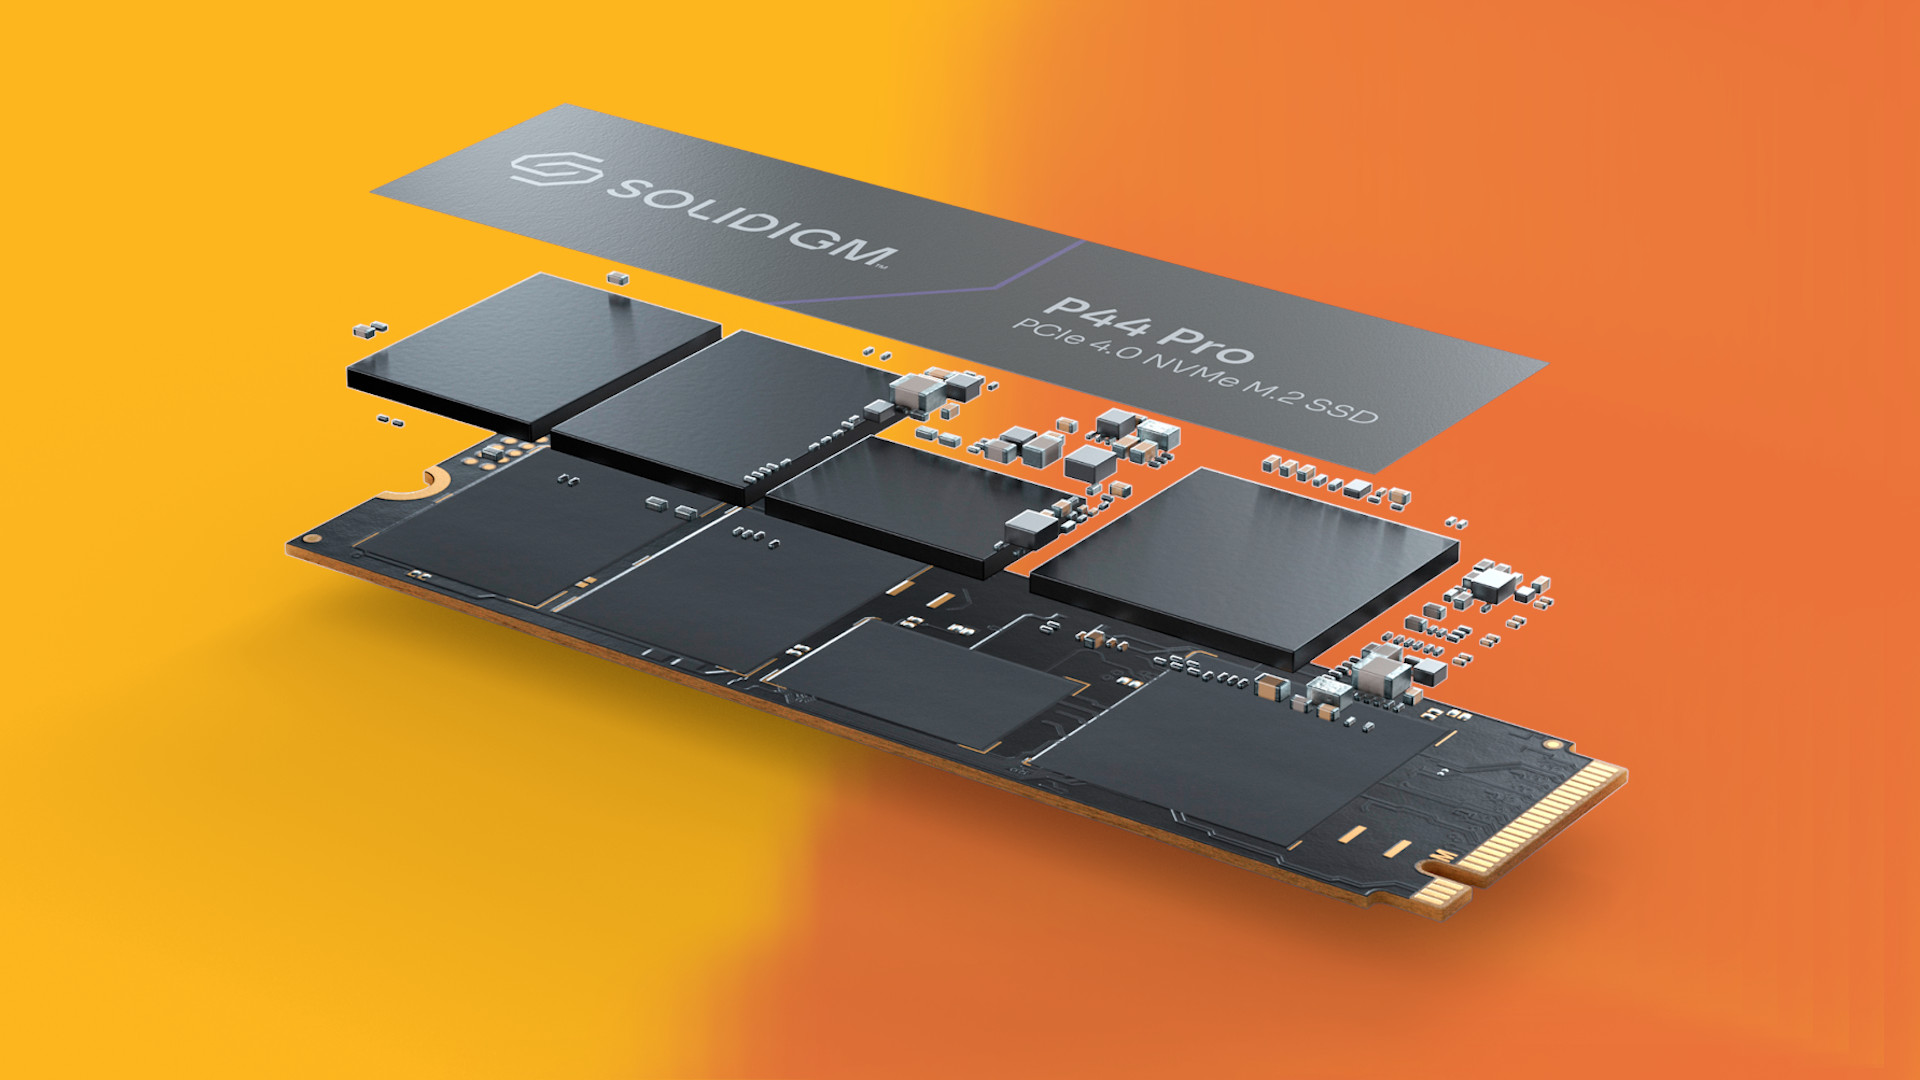 A deconstructed P44 Pro SSD on an orange and yellow background